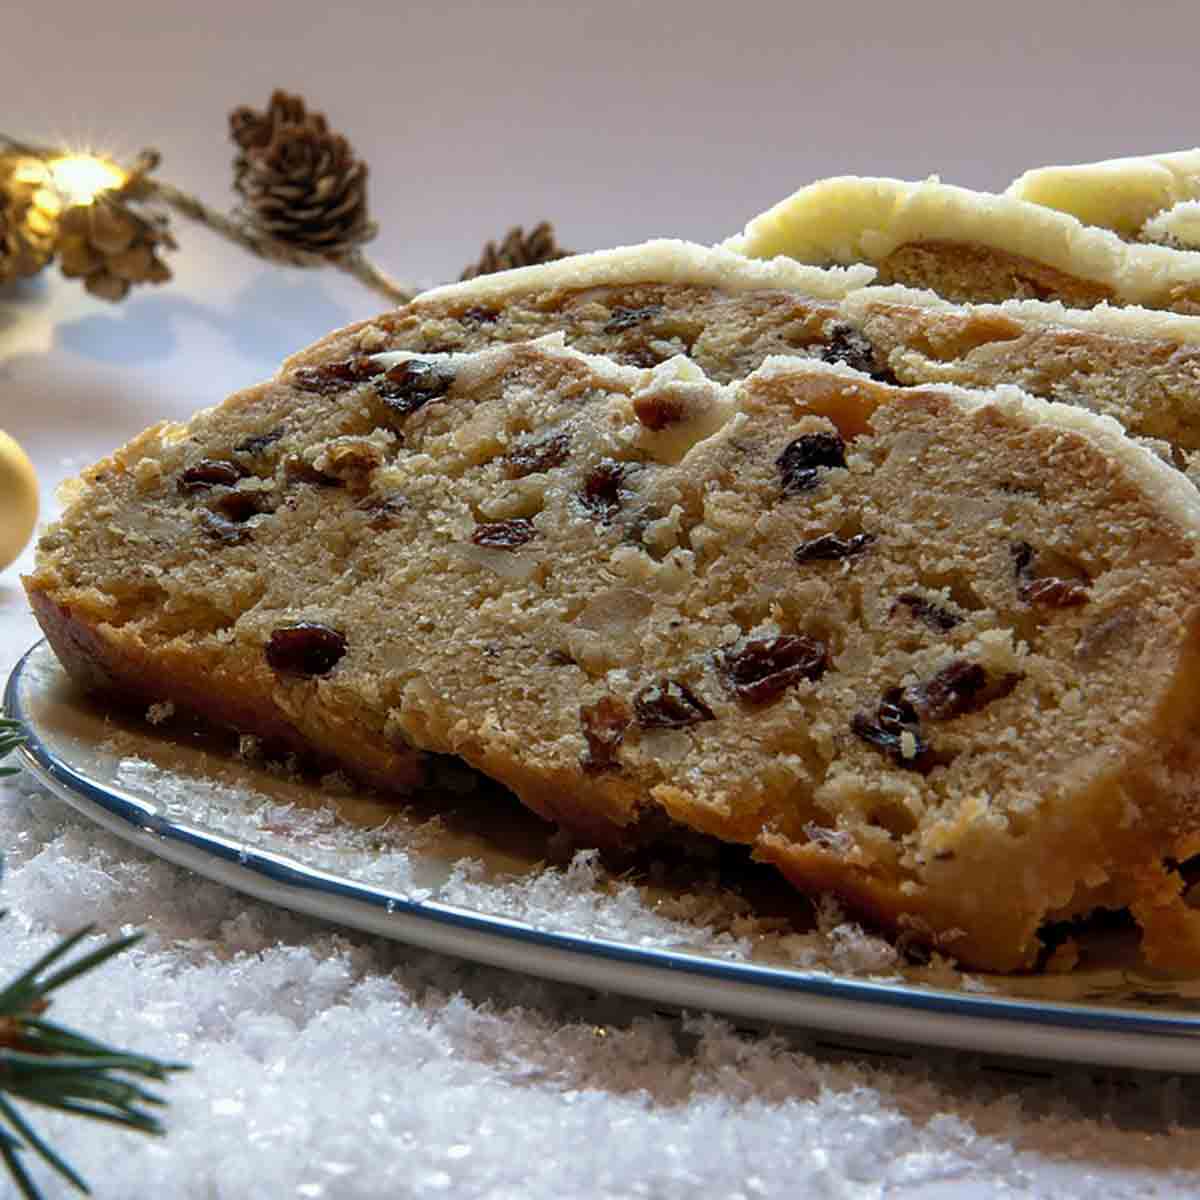 Image Of Slices Of Stollen Fruit Cake On A Plate